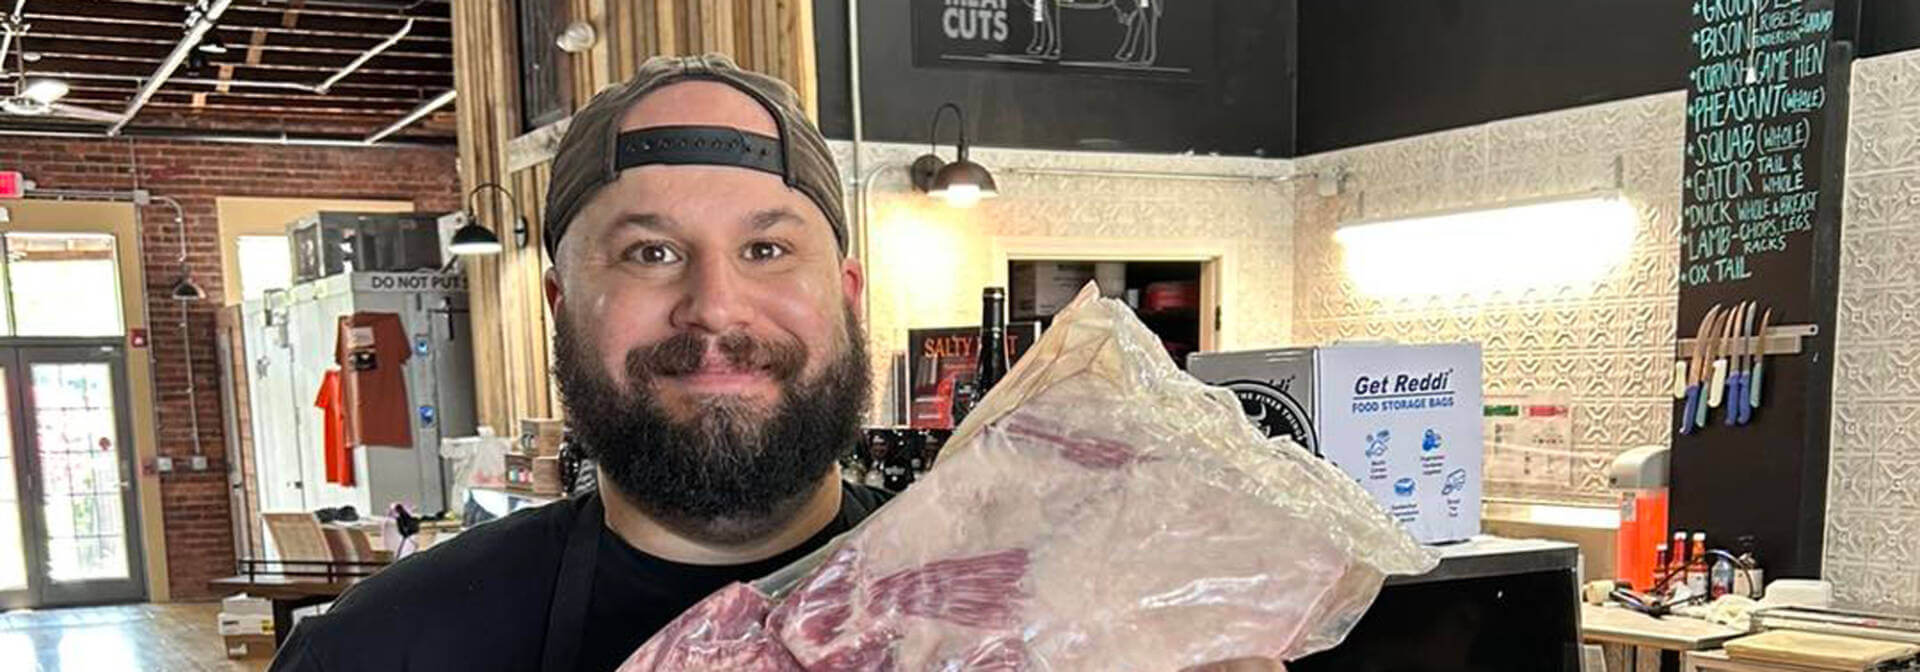 The Stock & Barrel butcher holding a cut of meat